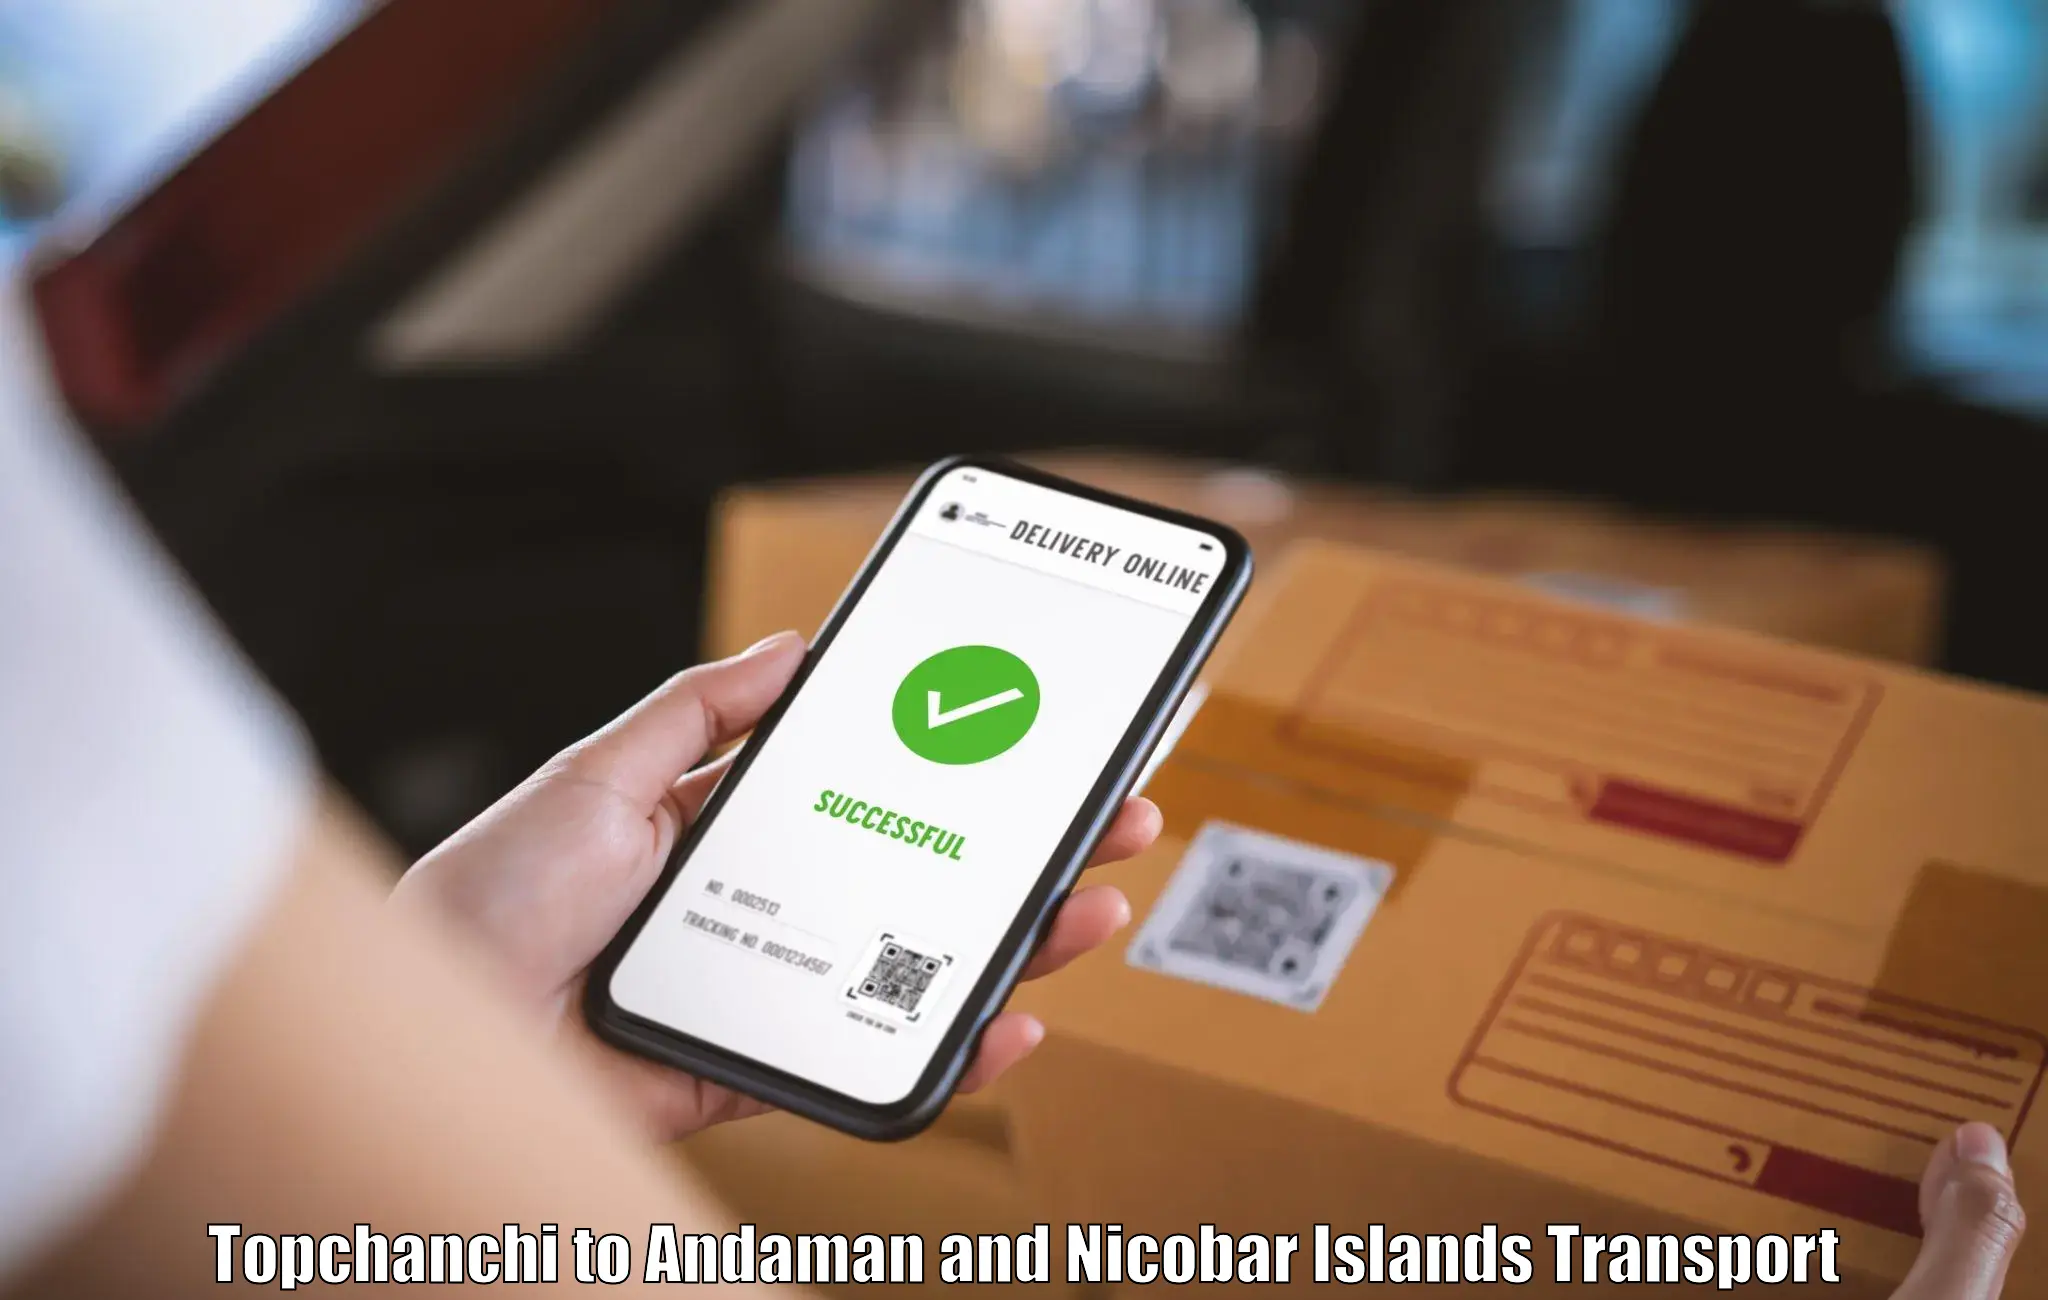 Online transport booking Topchanchi to Andaman and Nicobar Islands